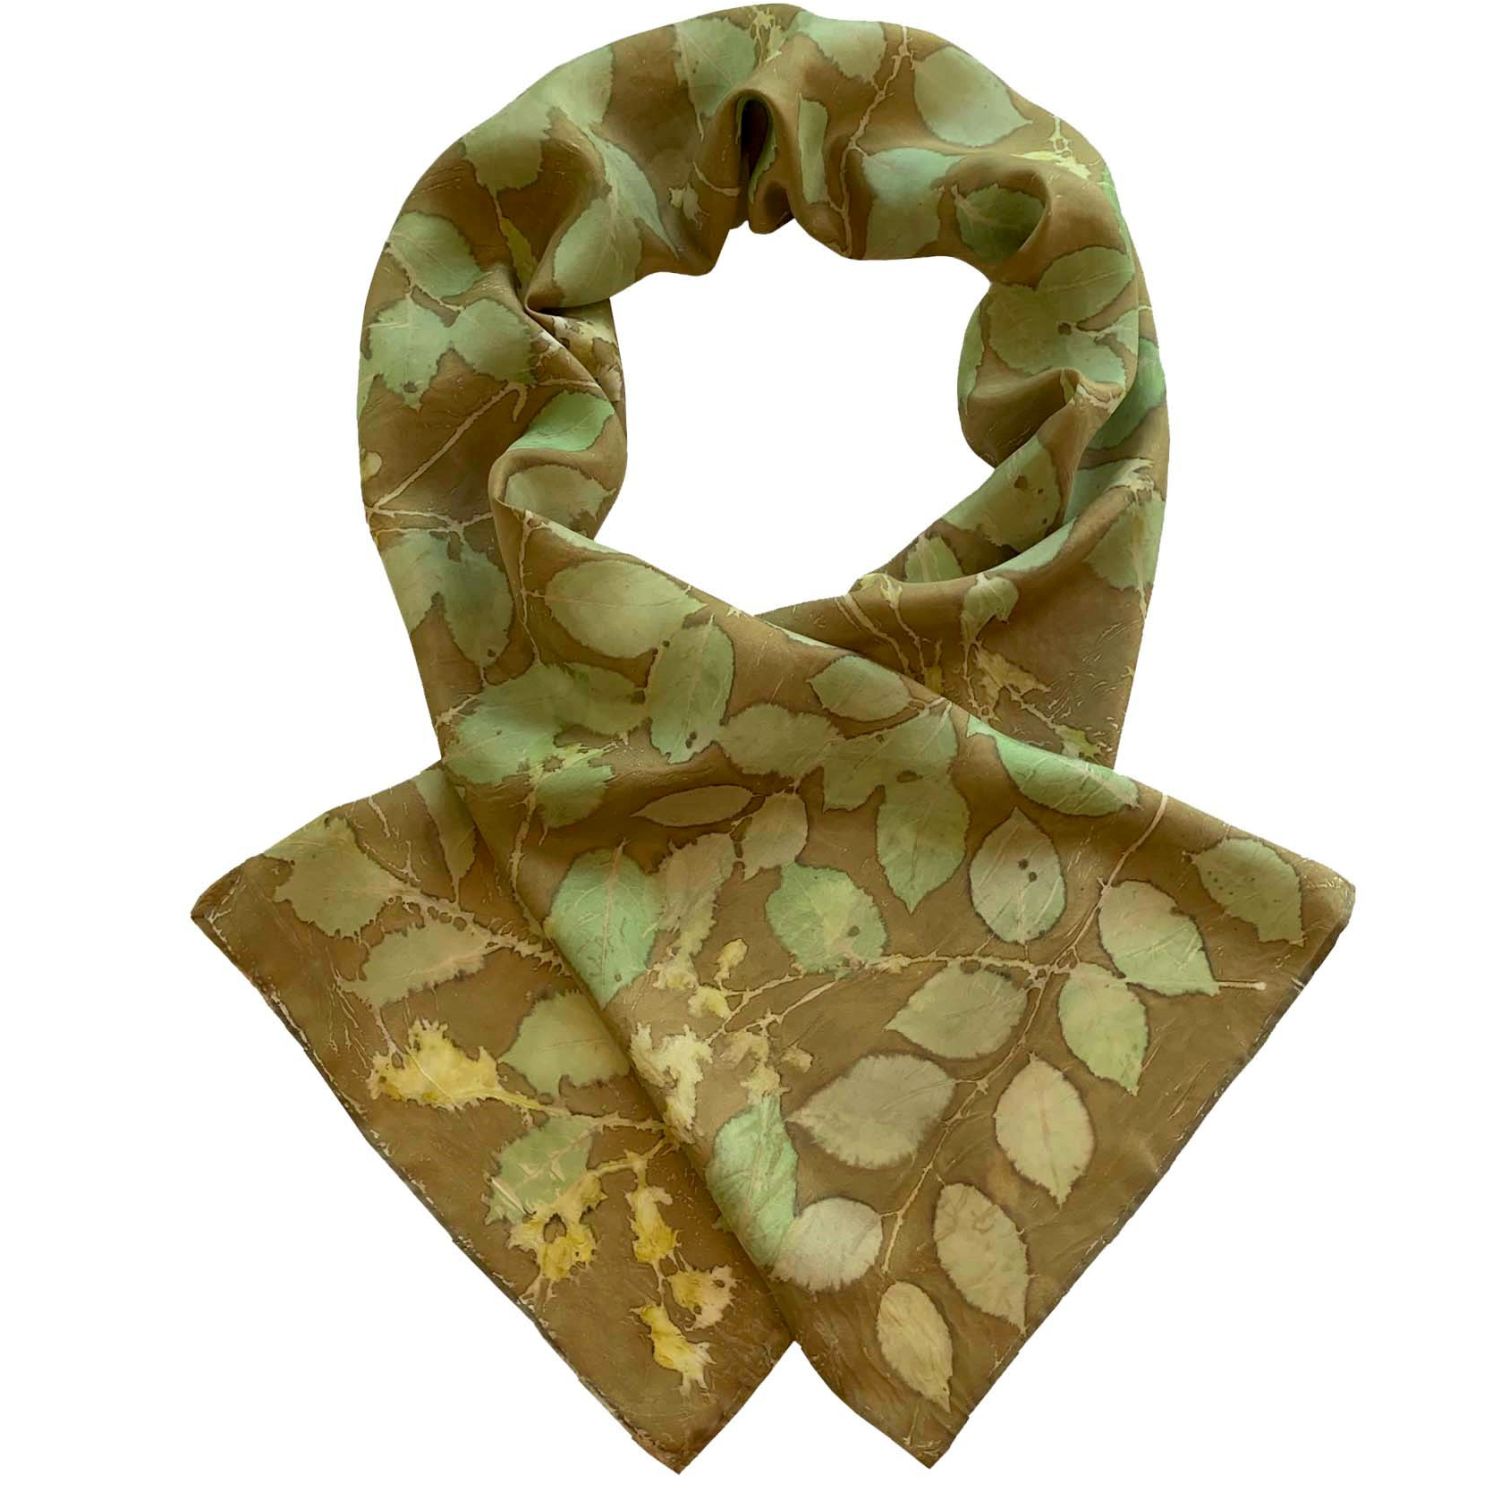 Marta Mouka: Silk Scarf in Pomegranate 2 Product Image 1 of 2